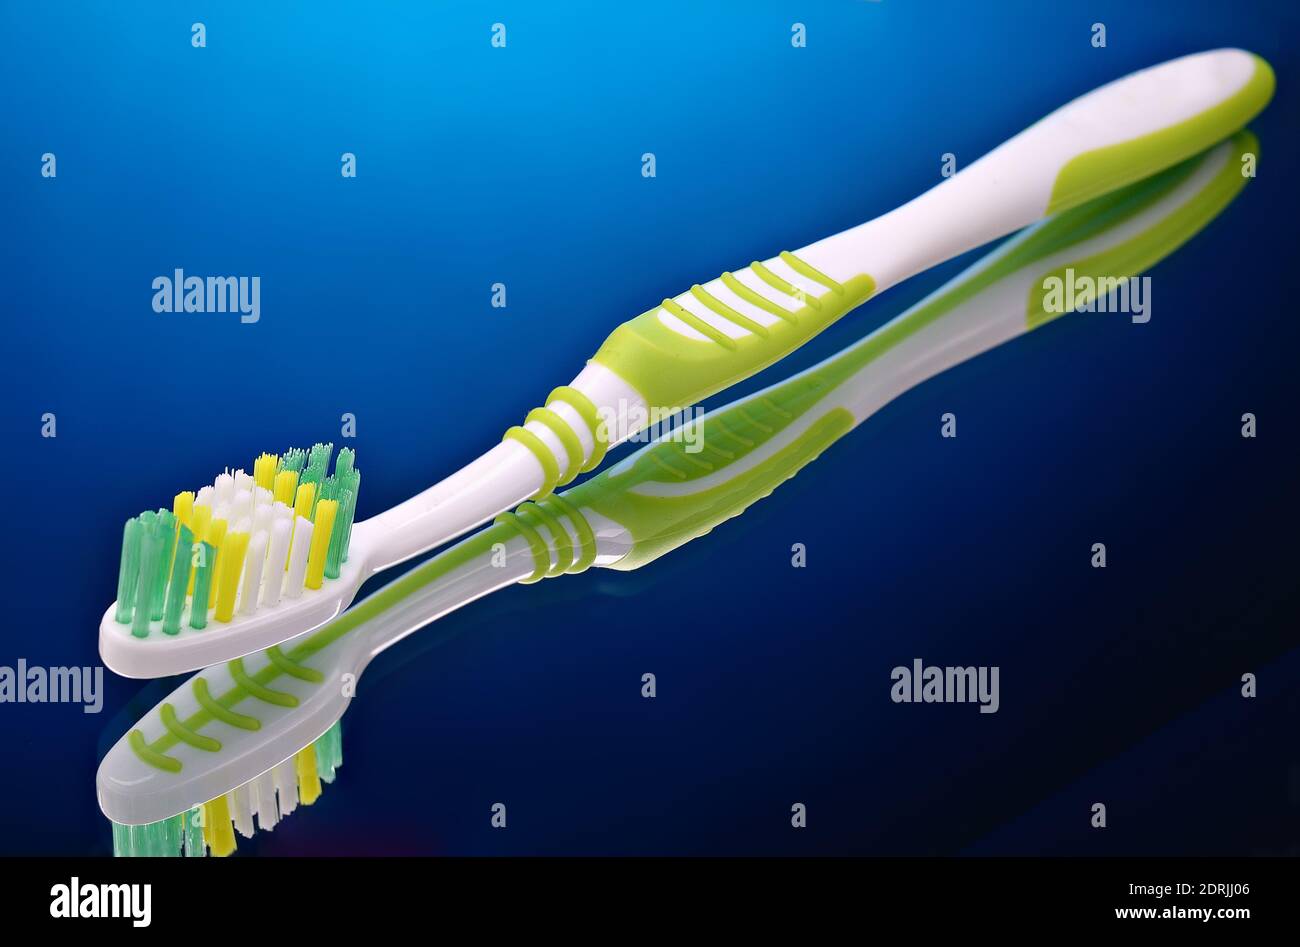 Toothbrush on a dark gradient background Stock Photo